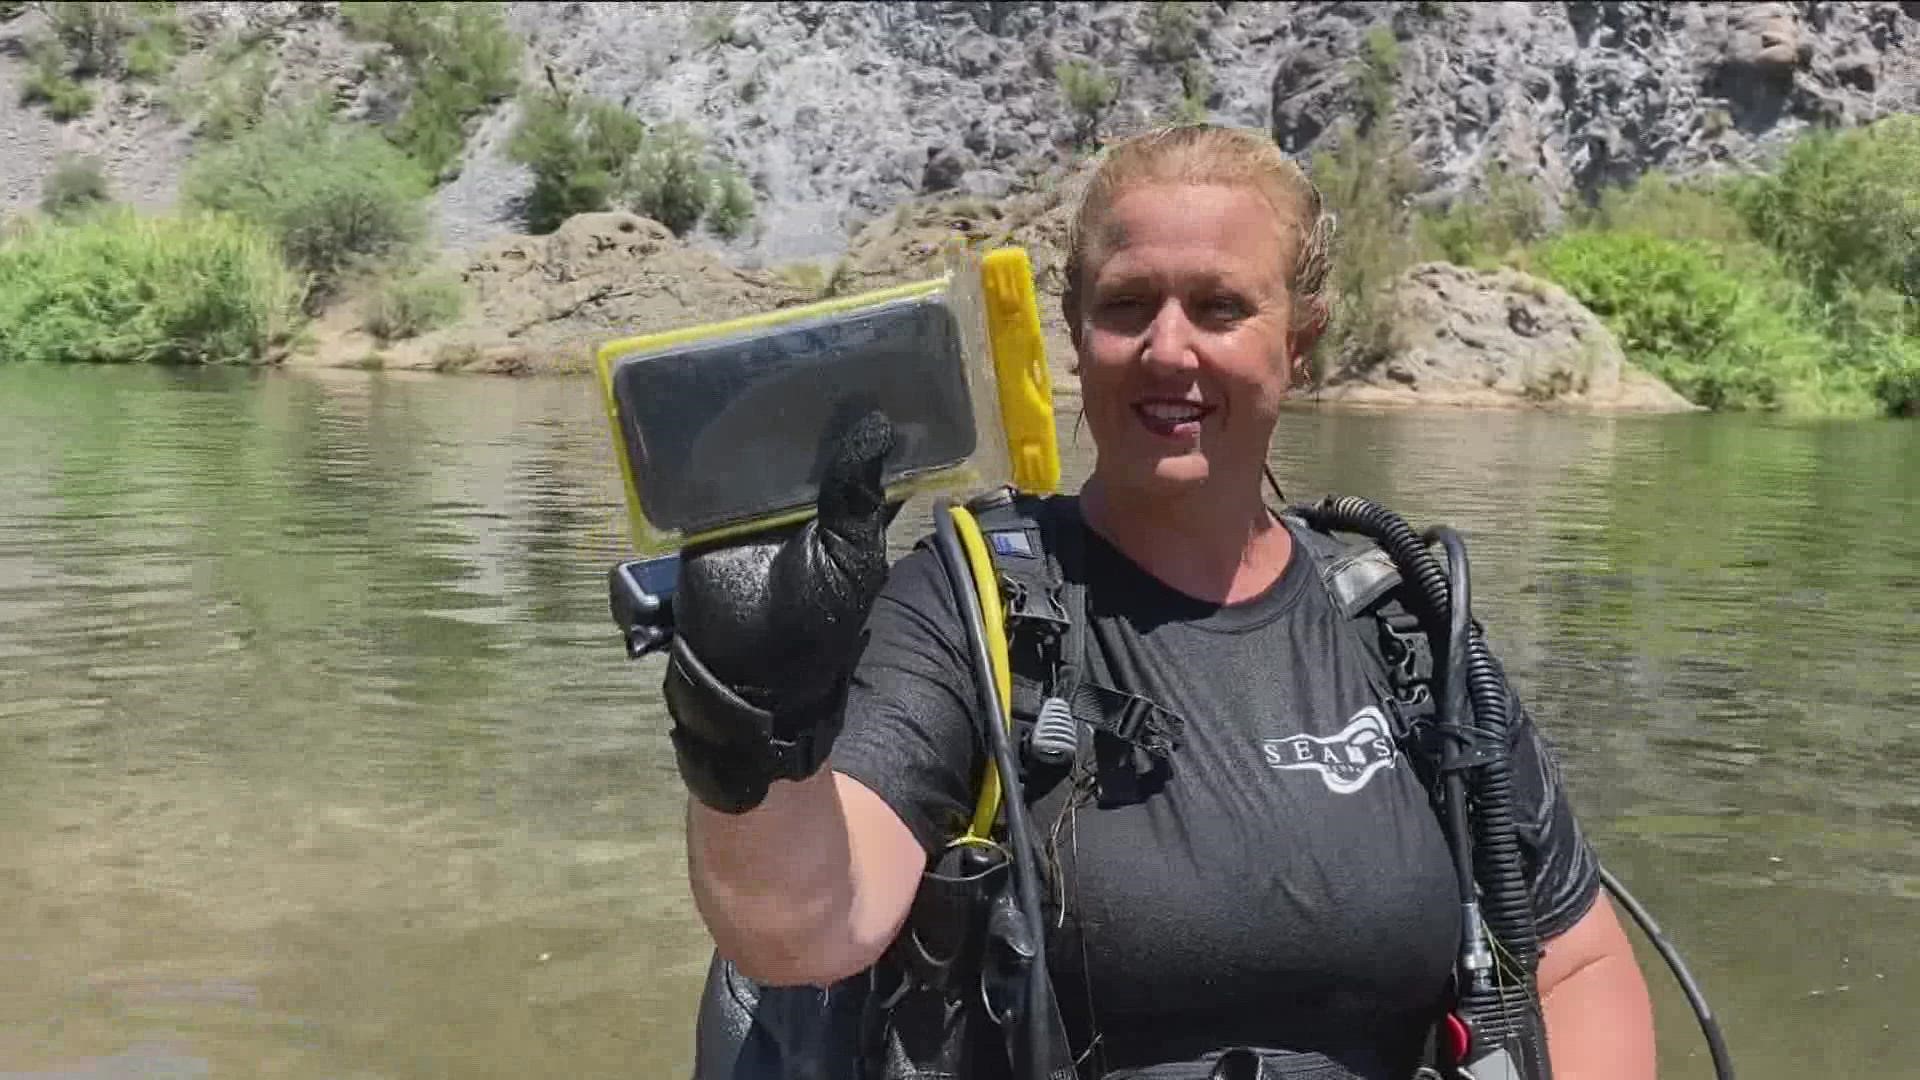 If you've lived in the Valley long enough, you likely know someone – or someone you know knows someone who lost something in the Salt River.